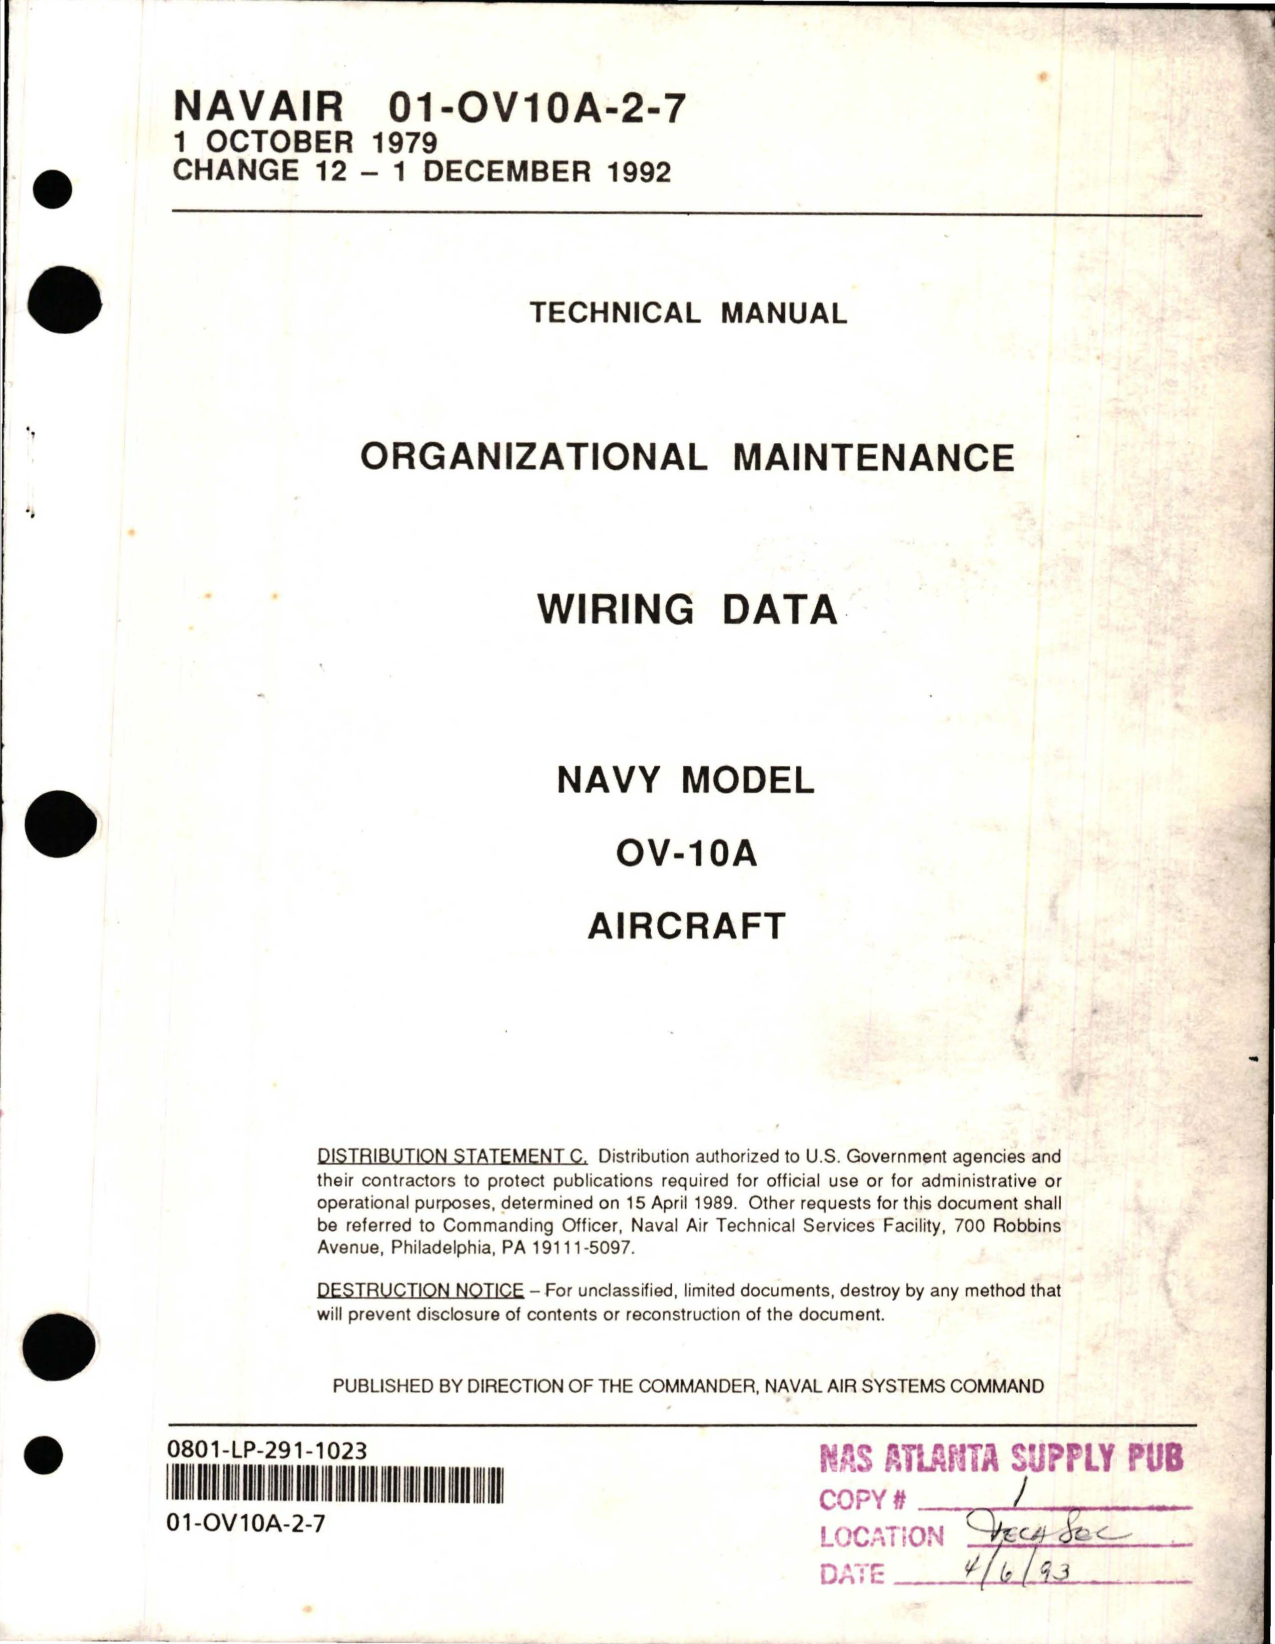 Sample page 1 from AirCorps Library document: Organizational Maintenance for Wiring Data for OV-10A